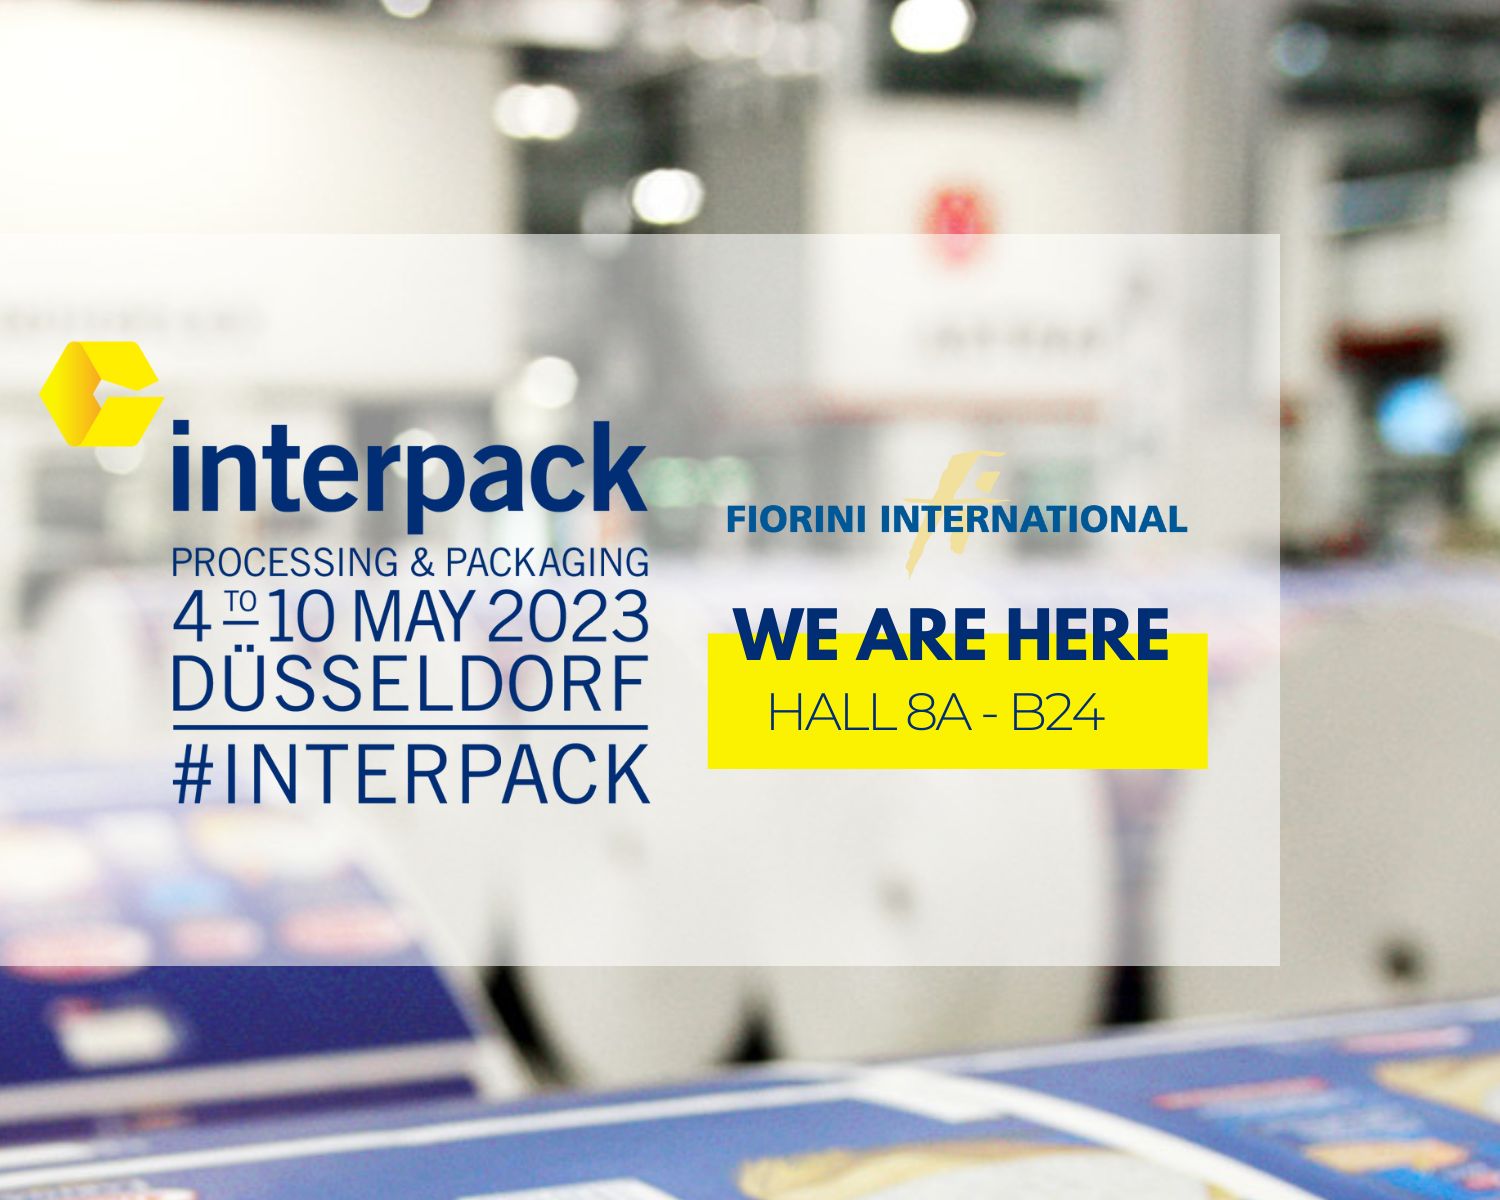 Fiorini International at Interpack 2023 to be unique in packaging production